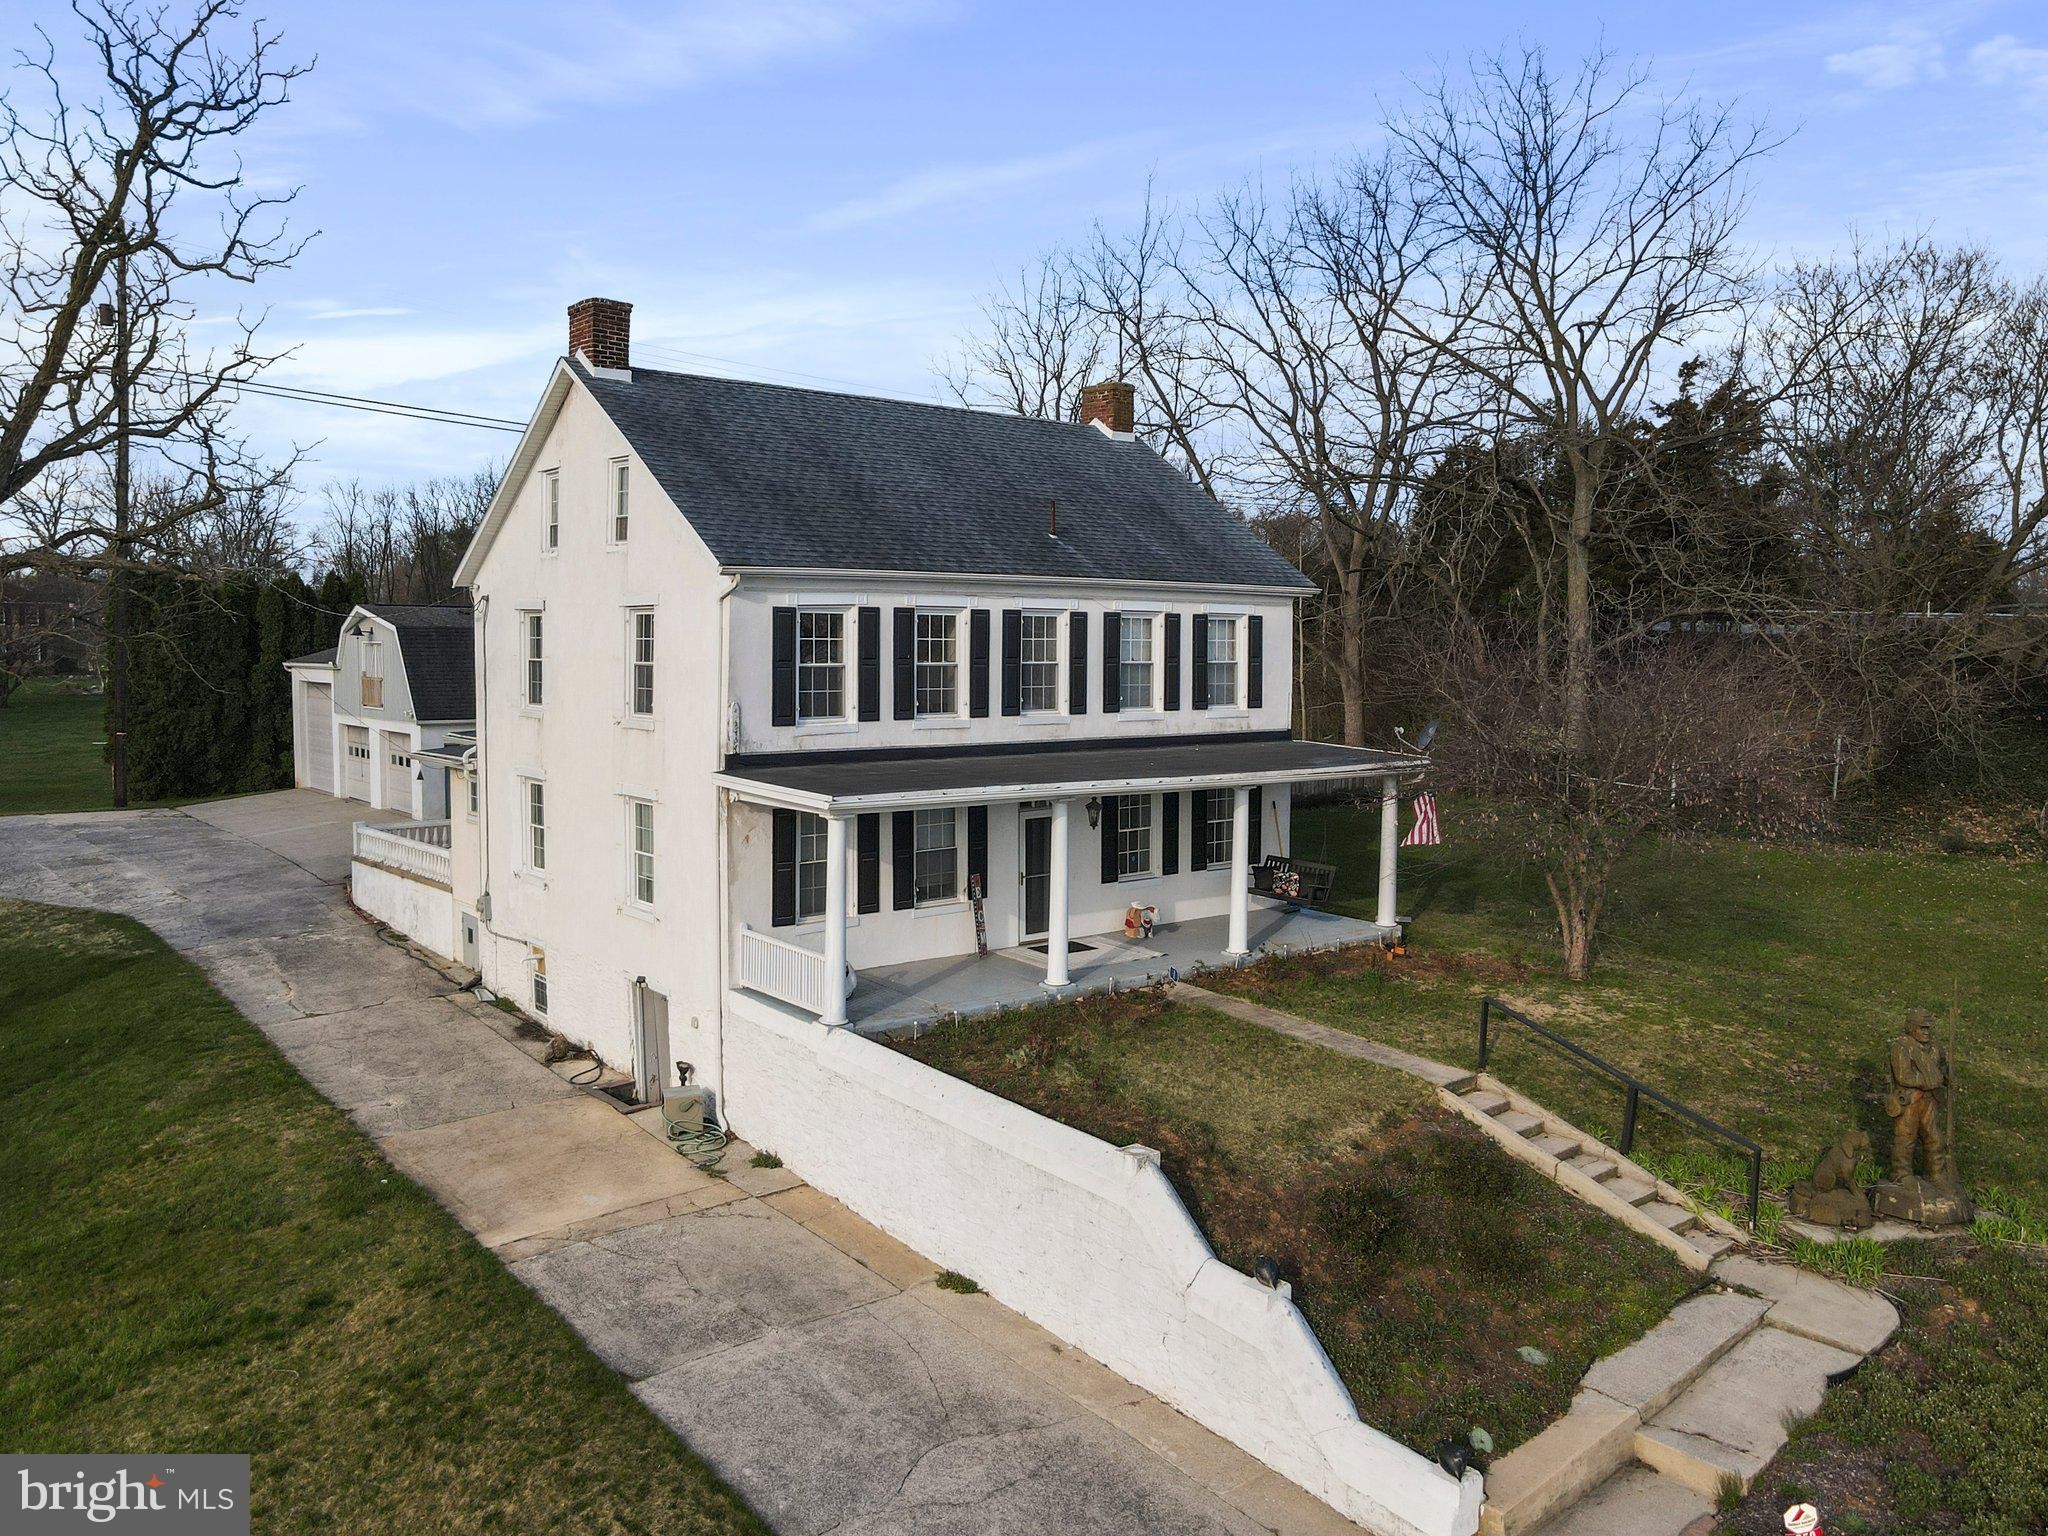 1. 950 Taxville Road